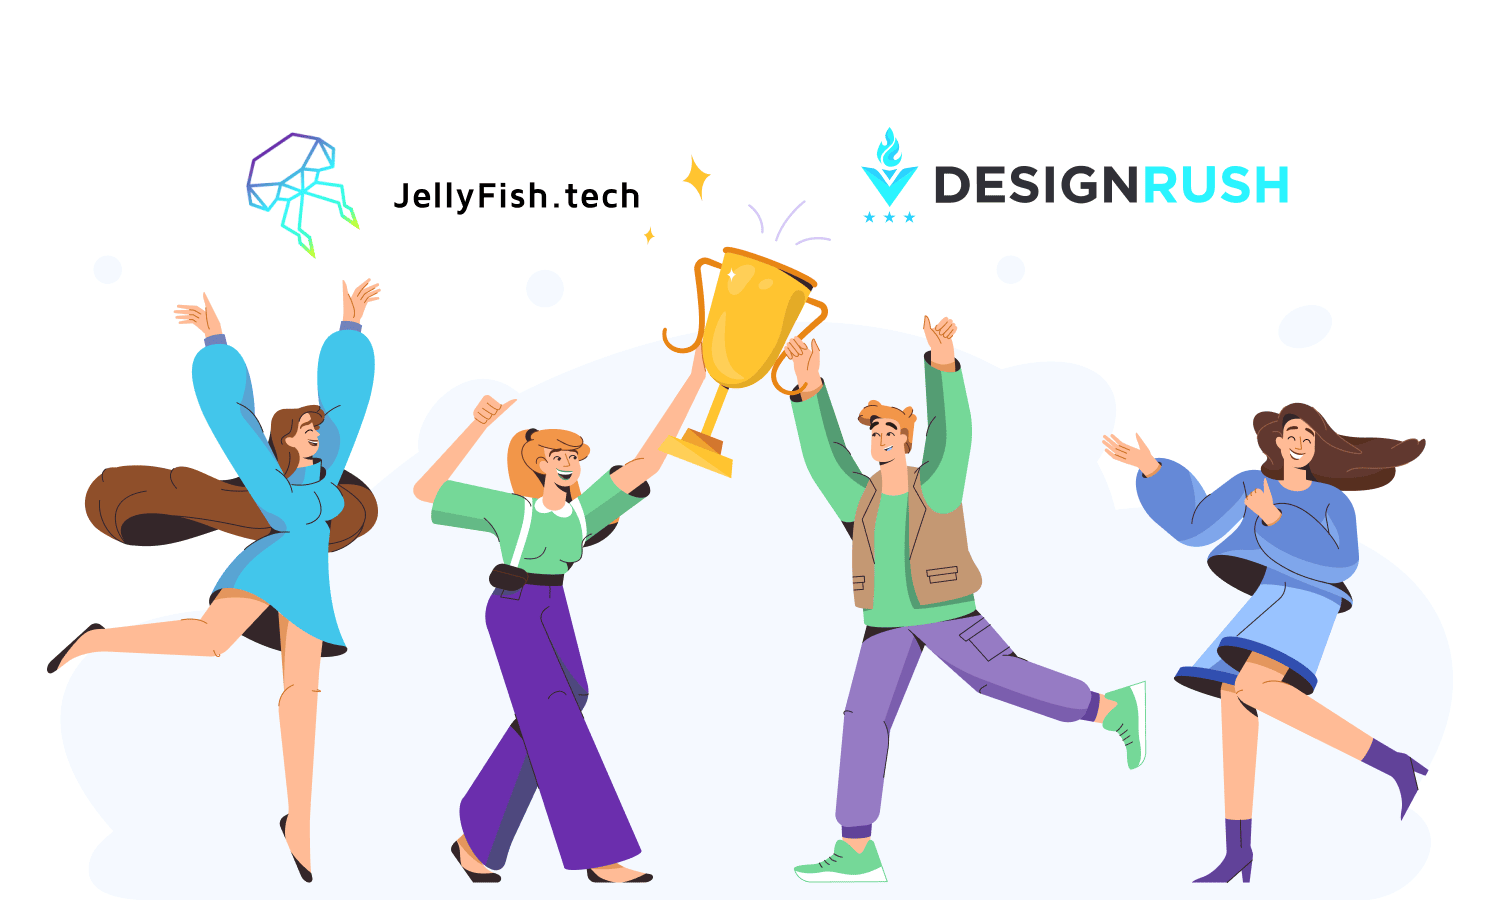 JellyFish.tech ranked among the top creative agencies to hire in 2022